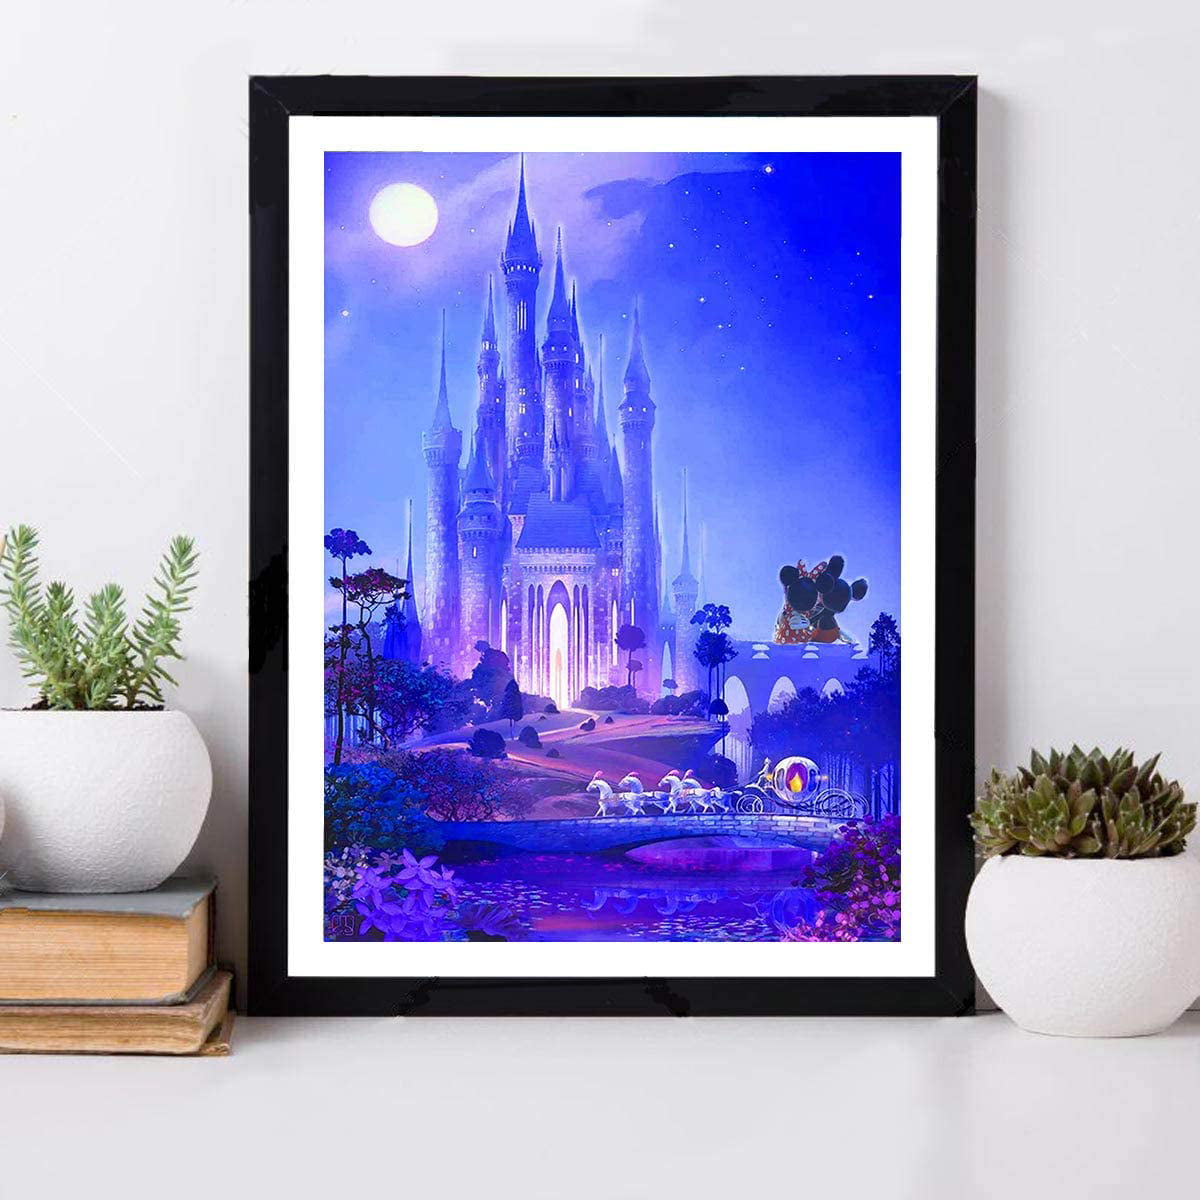 Full Drill Diamond Painting for Adults and Kids,Round Diamond Art Perfect for Relaxation and Home Wall Decor Gift（Castle,12x16inch） DIY 5D Diamond Painting Kits